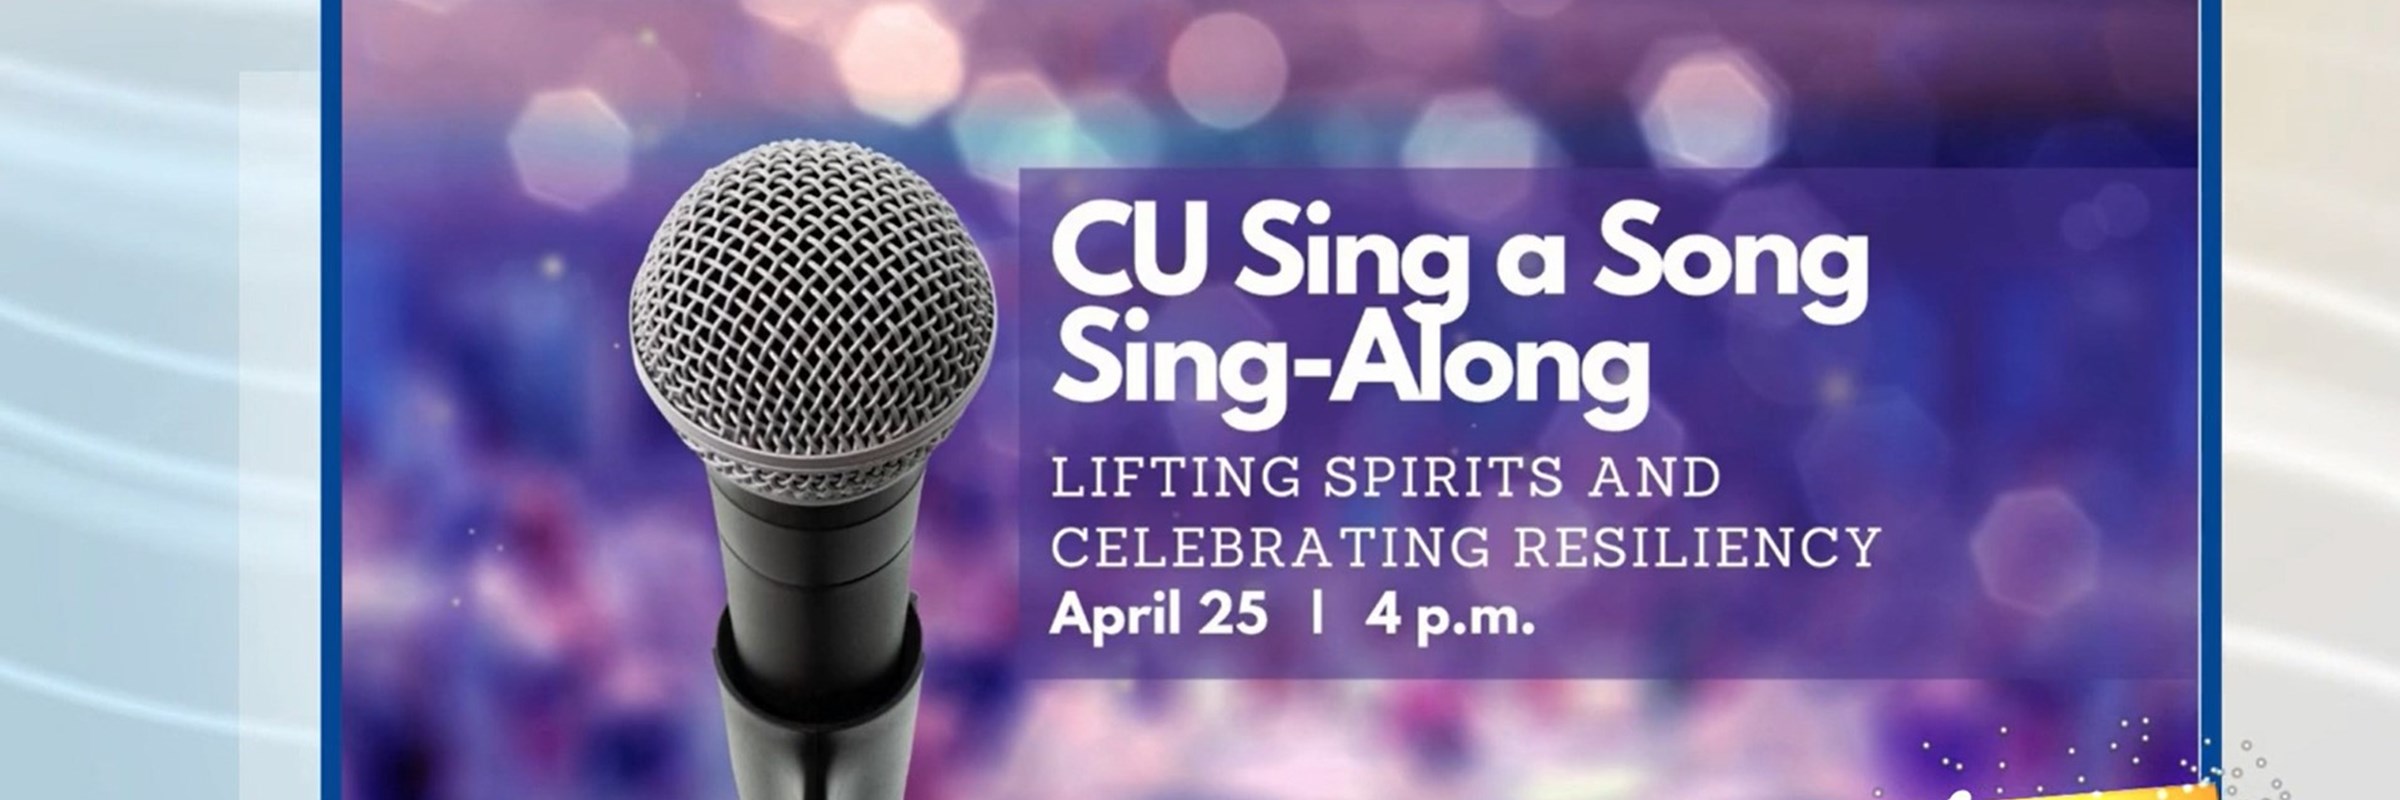 First-ever "CU Sing-Along"